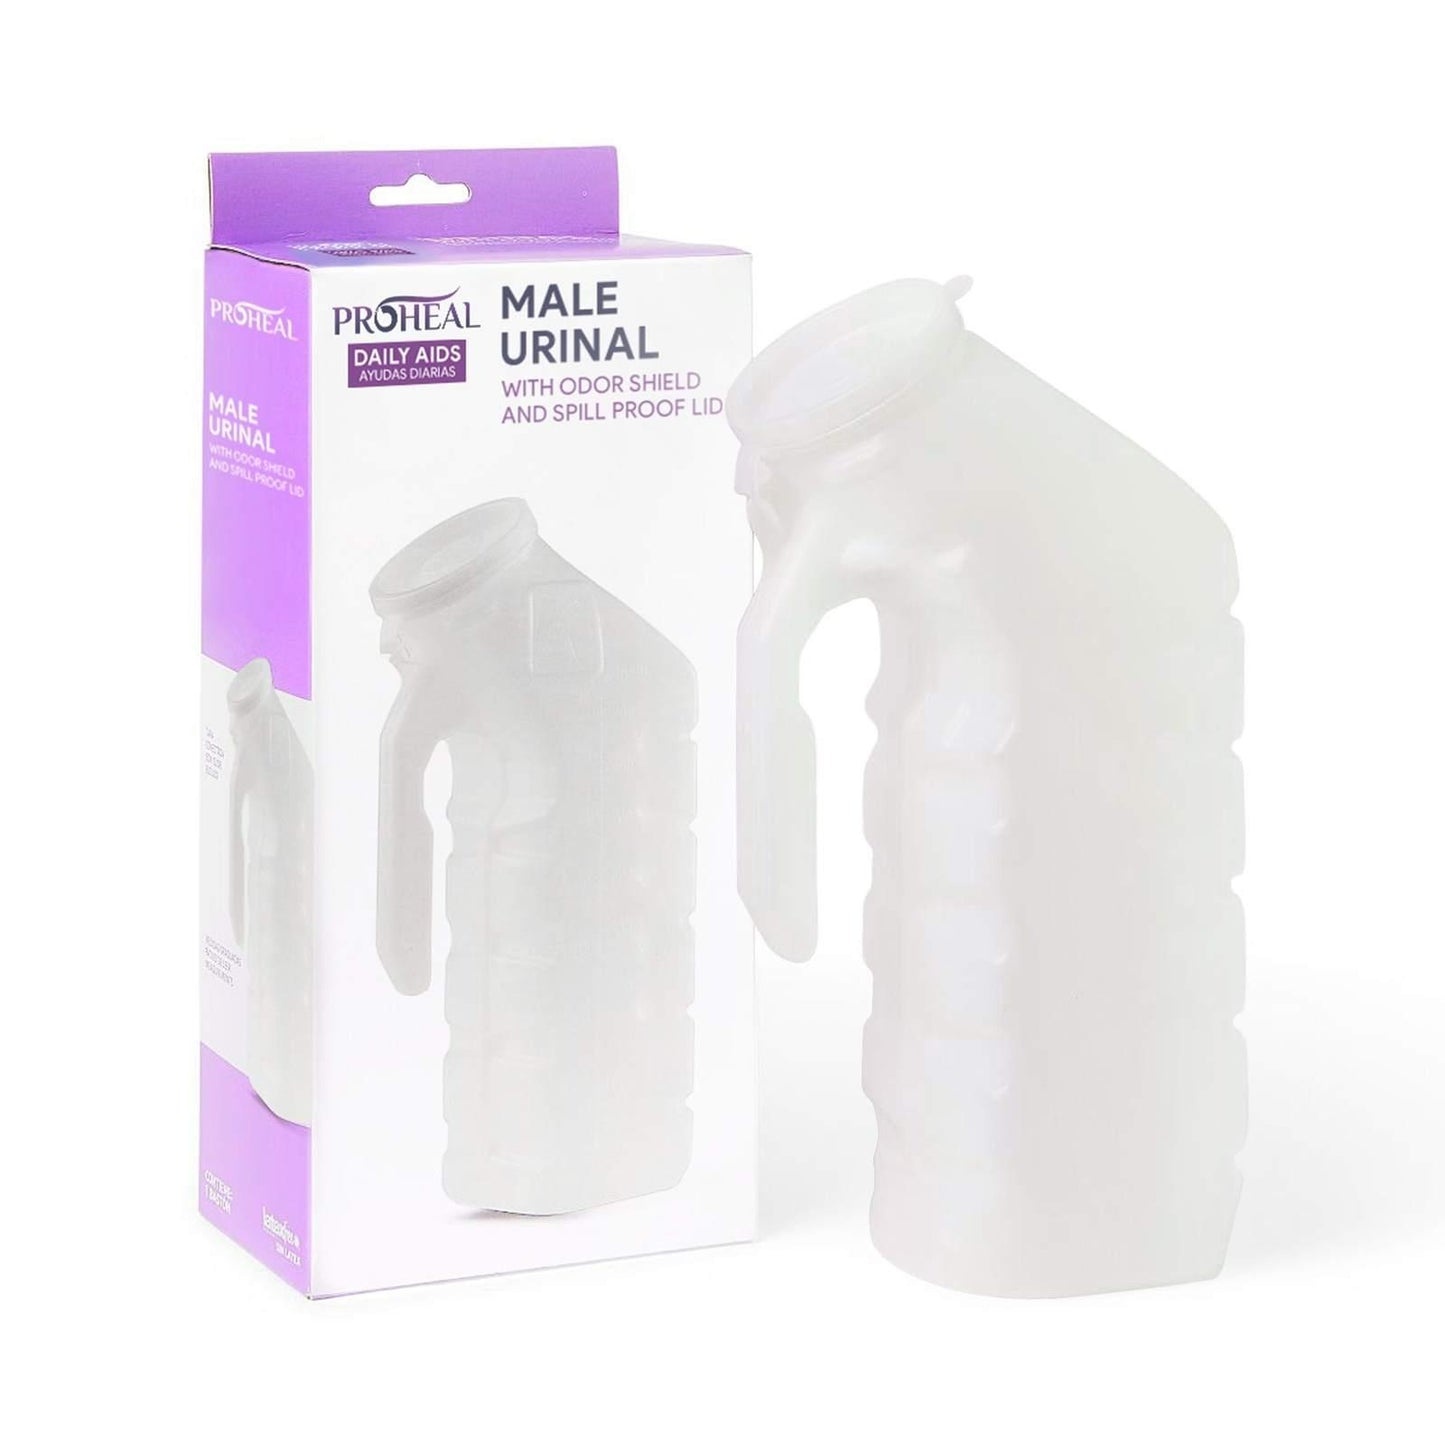 Portable Urinals For Men - Spill Proof Pee 32oz Bottles ProHeal